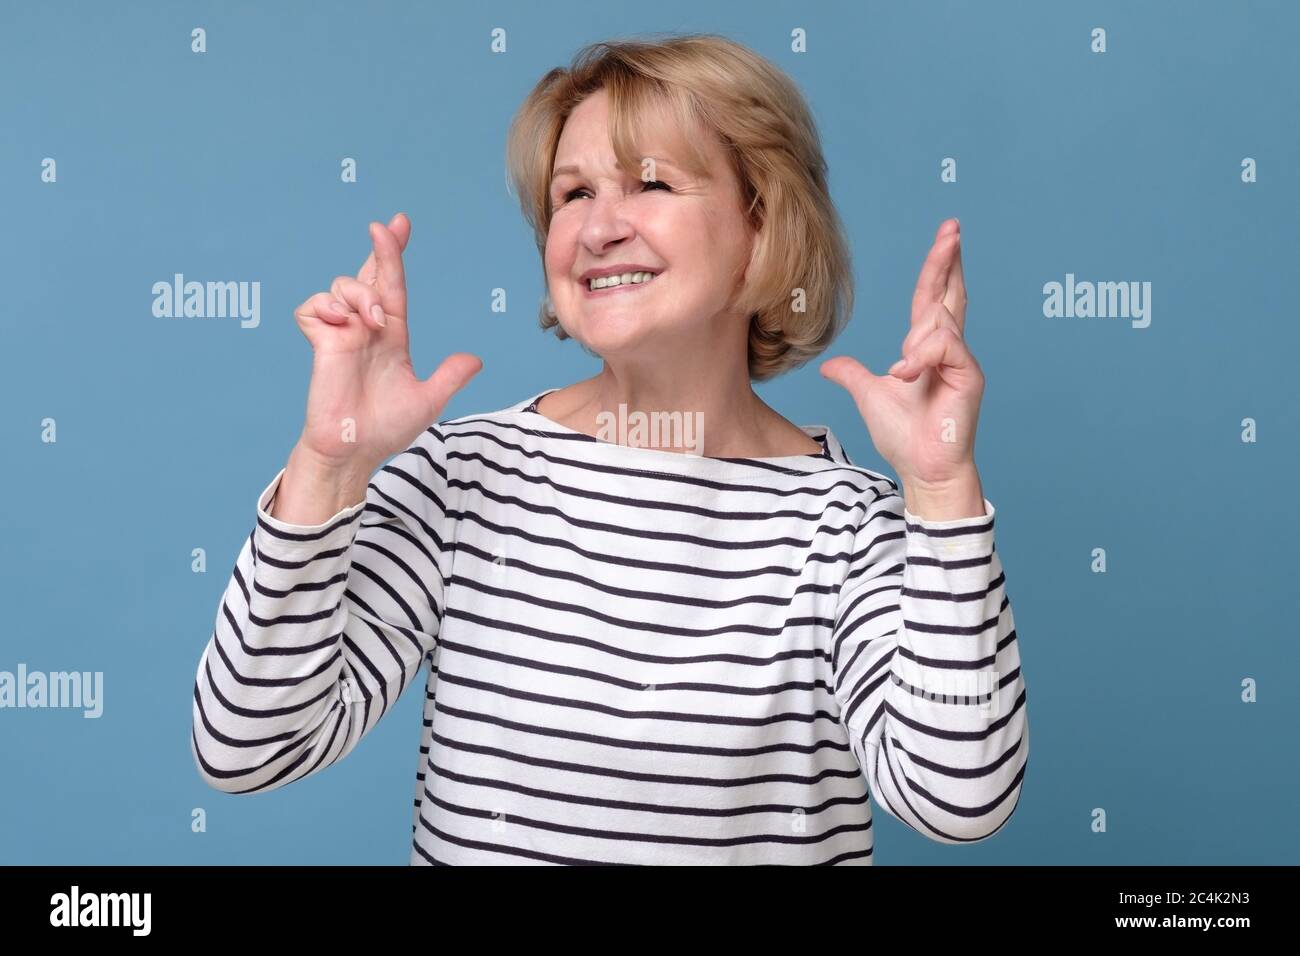 Mature caucasian woman holding fingers crossed wishing a luck Stock Photo